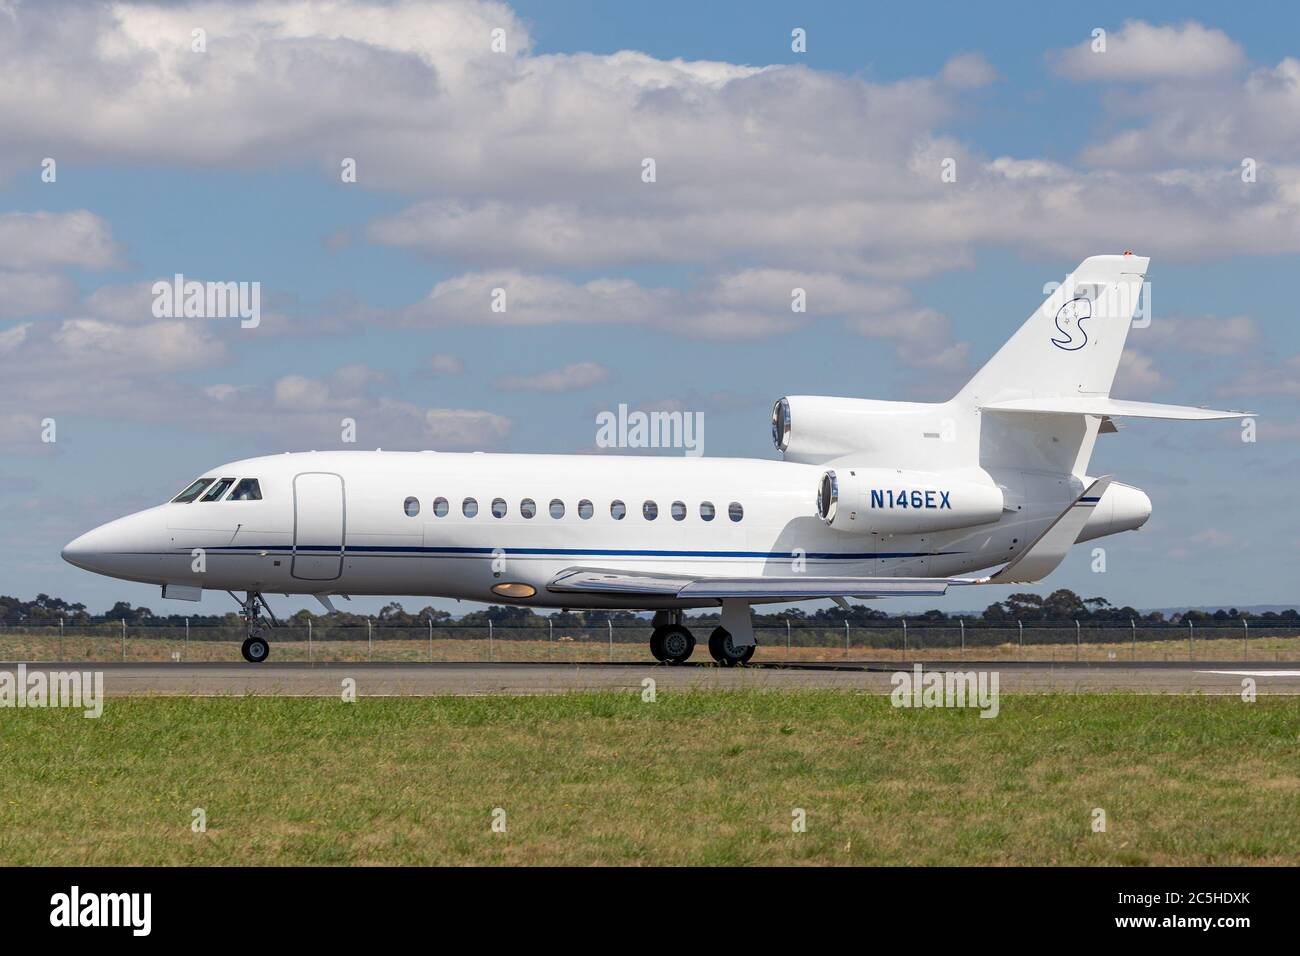 Dassault Falcon 900EX Business jet N146EX on the runway at Avalon Airport. Stock Photo